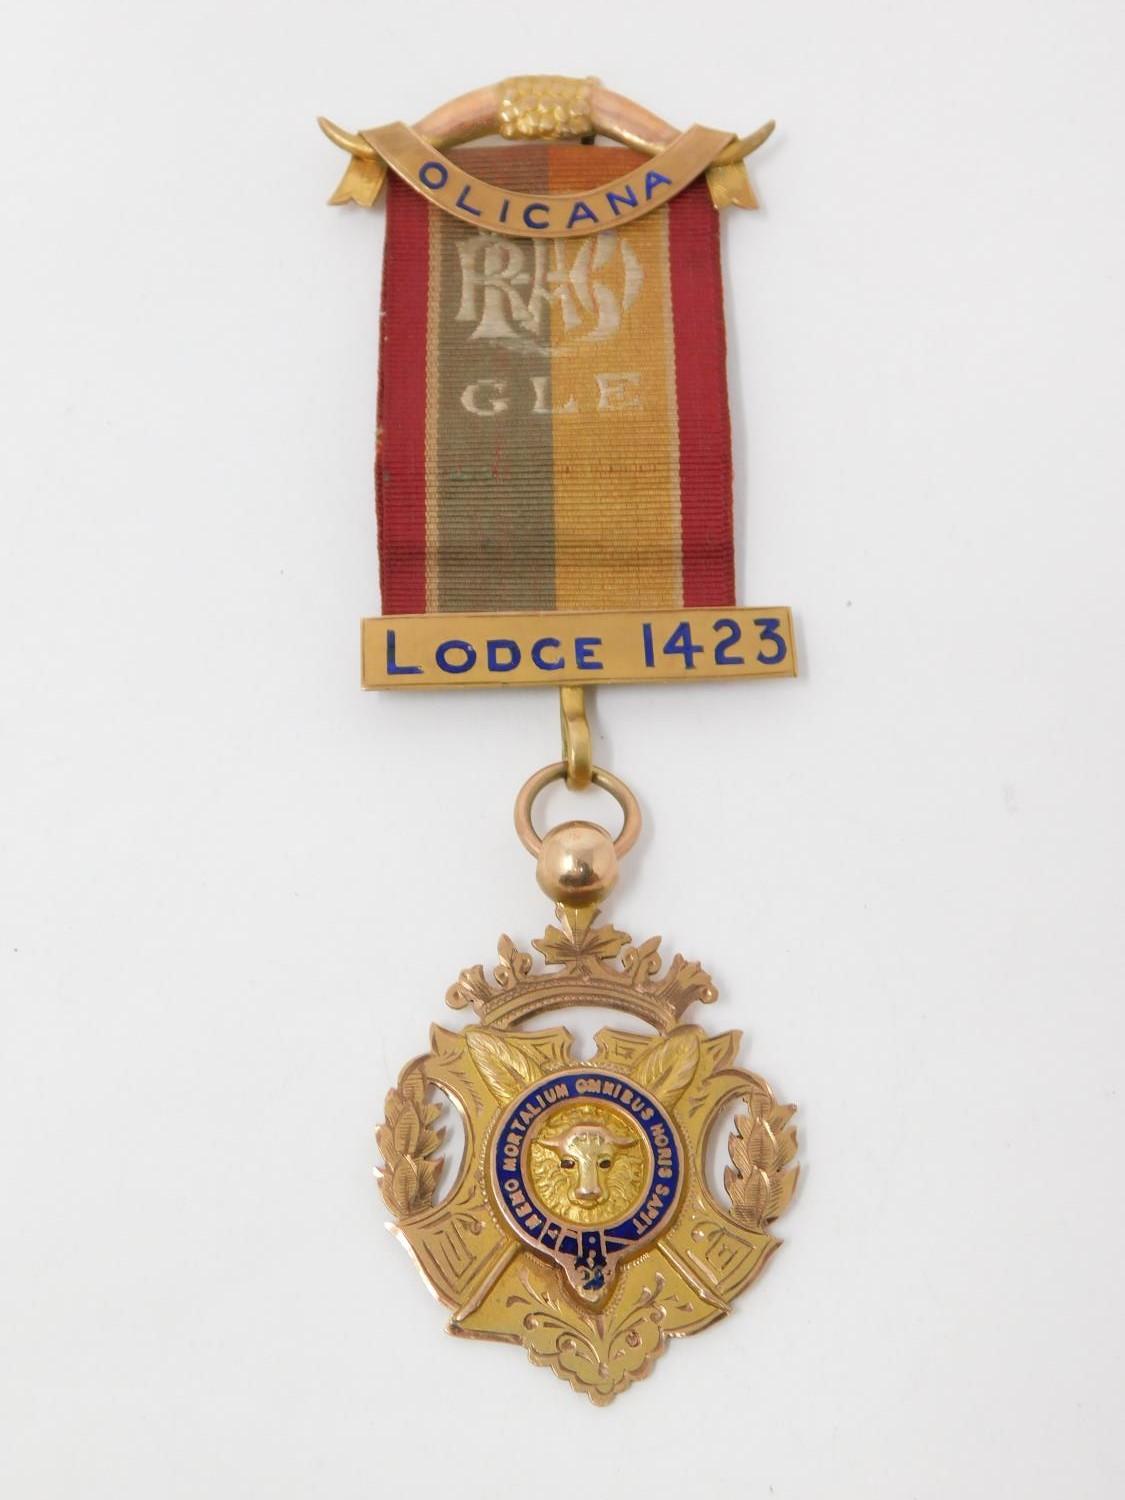 A 9 ct rose gold and enamel engraved Masonic lodge 1423 medal on an embroidered silk ribbon.